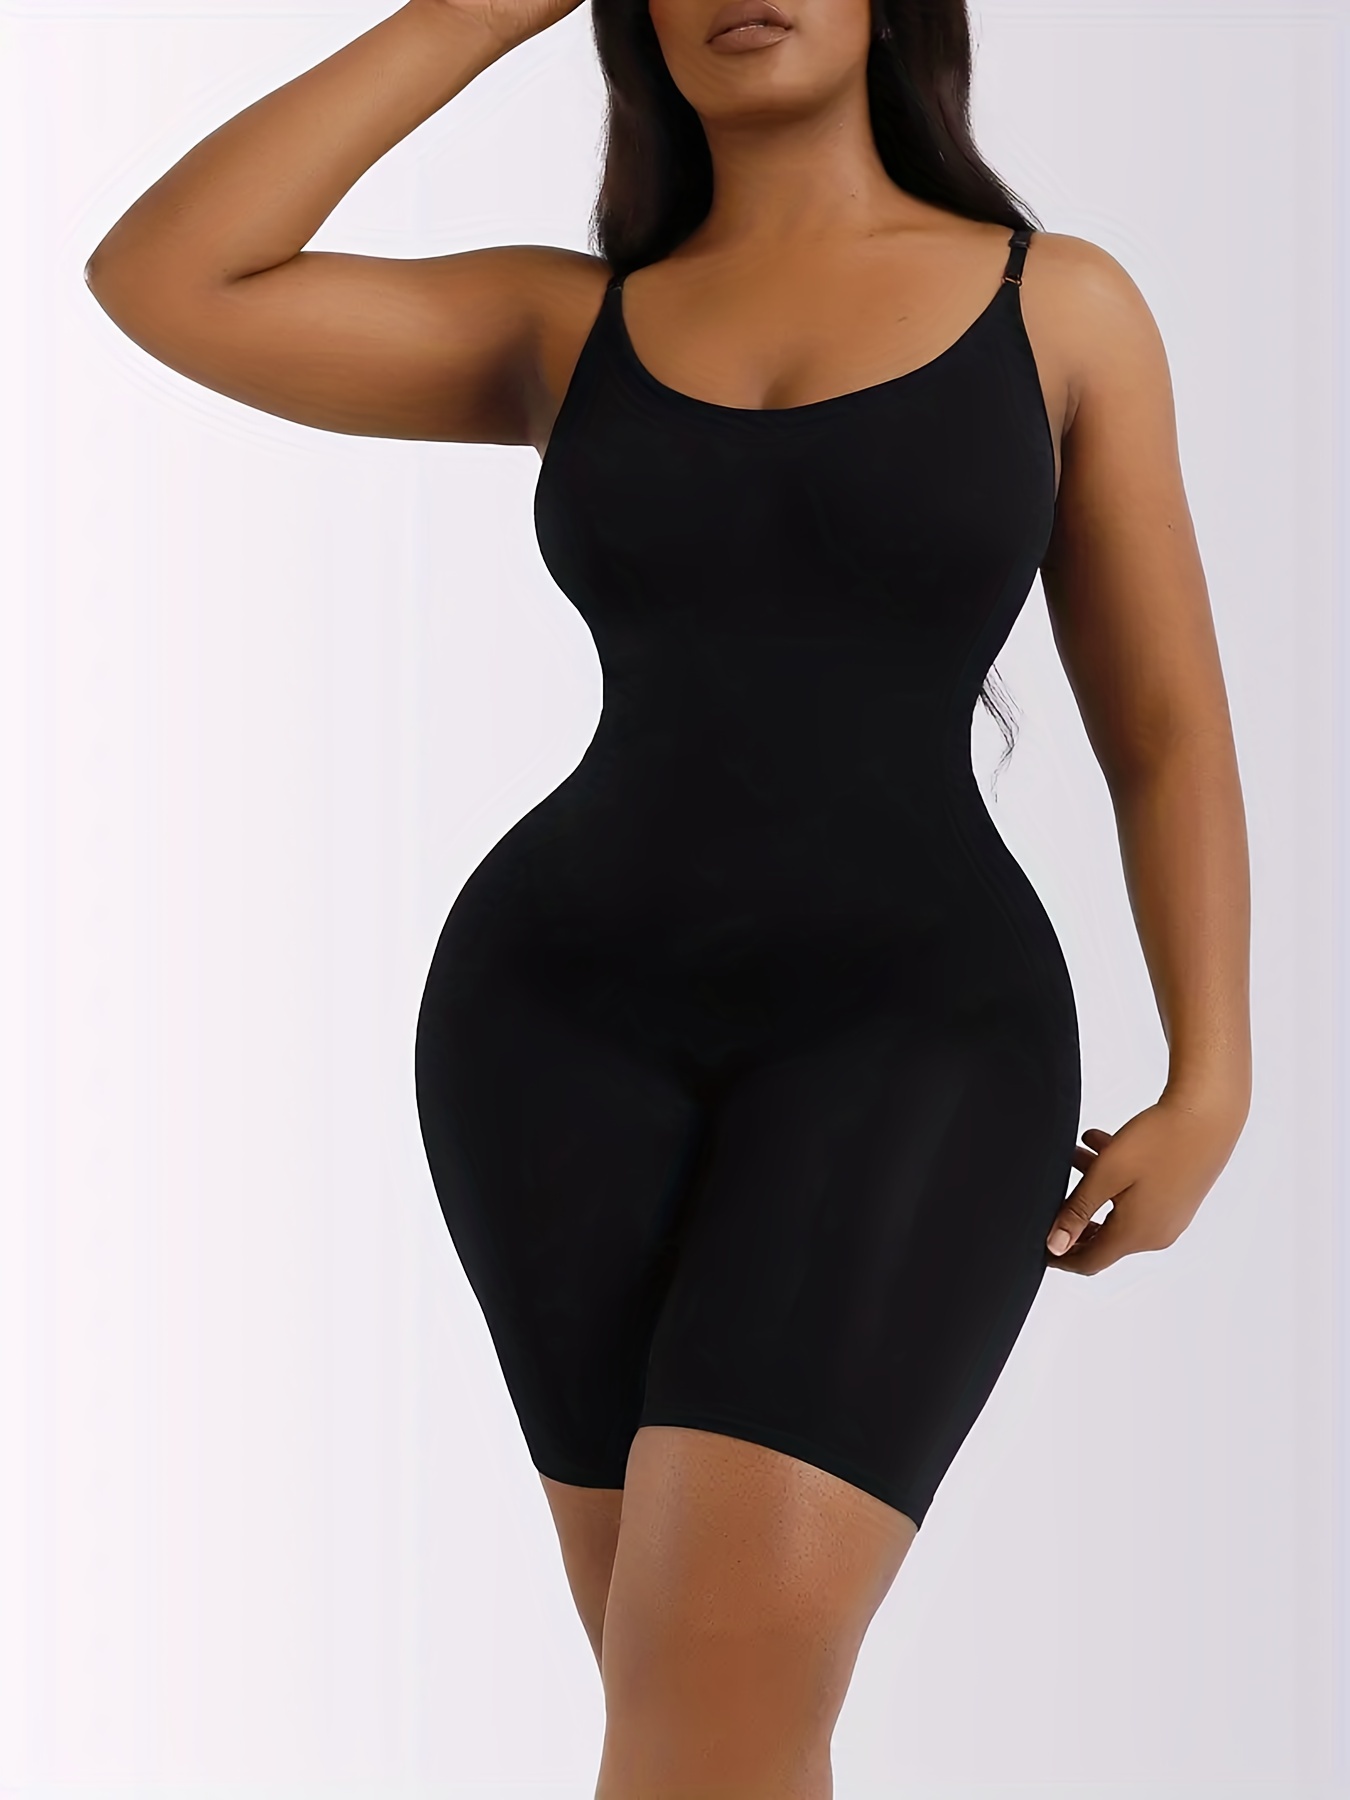 Seamless Shapewear Bodysuit For Women Tummy Control Butt Lifter Body Shaper  Smooth Invisible Under Dress Slimming Underwear,black